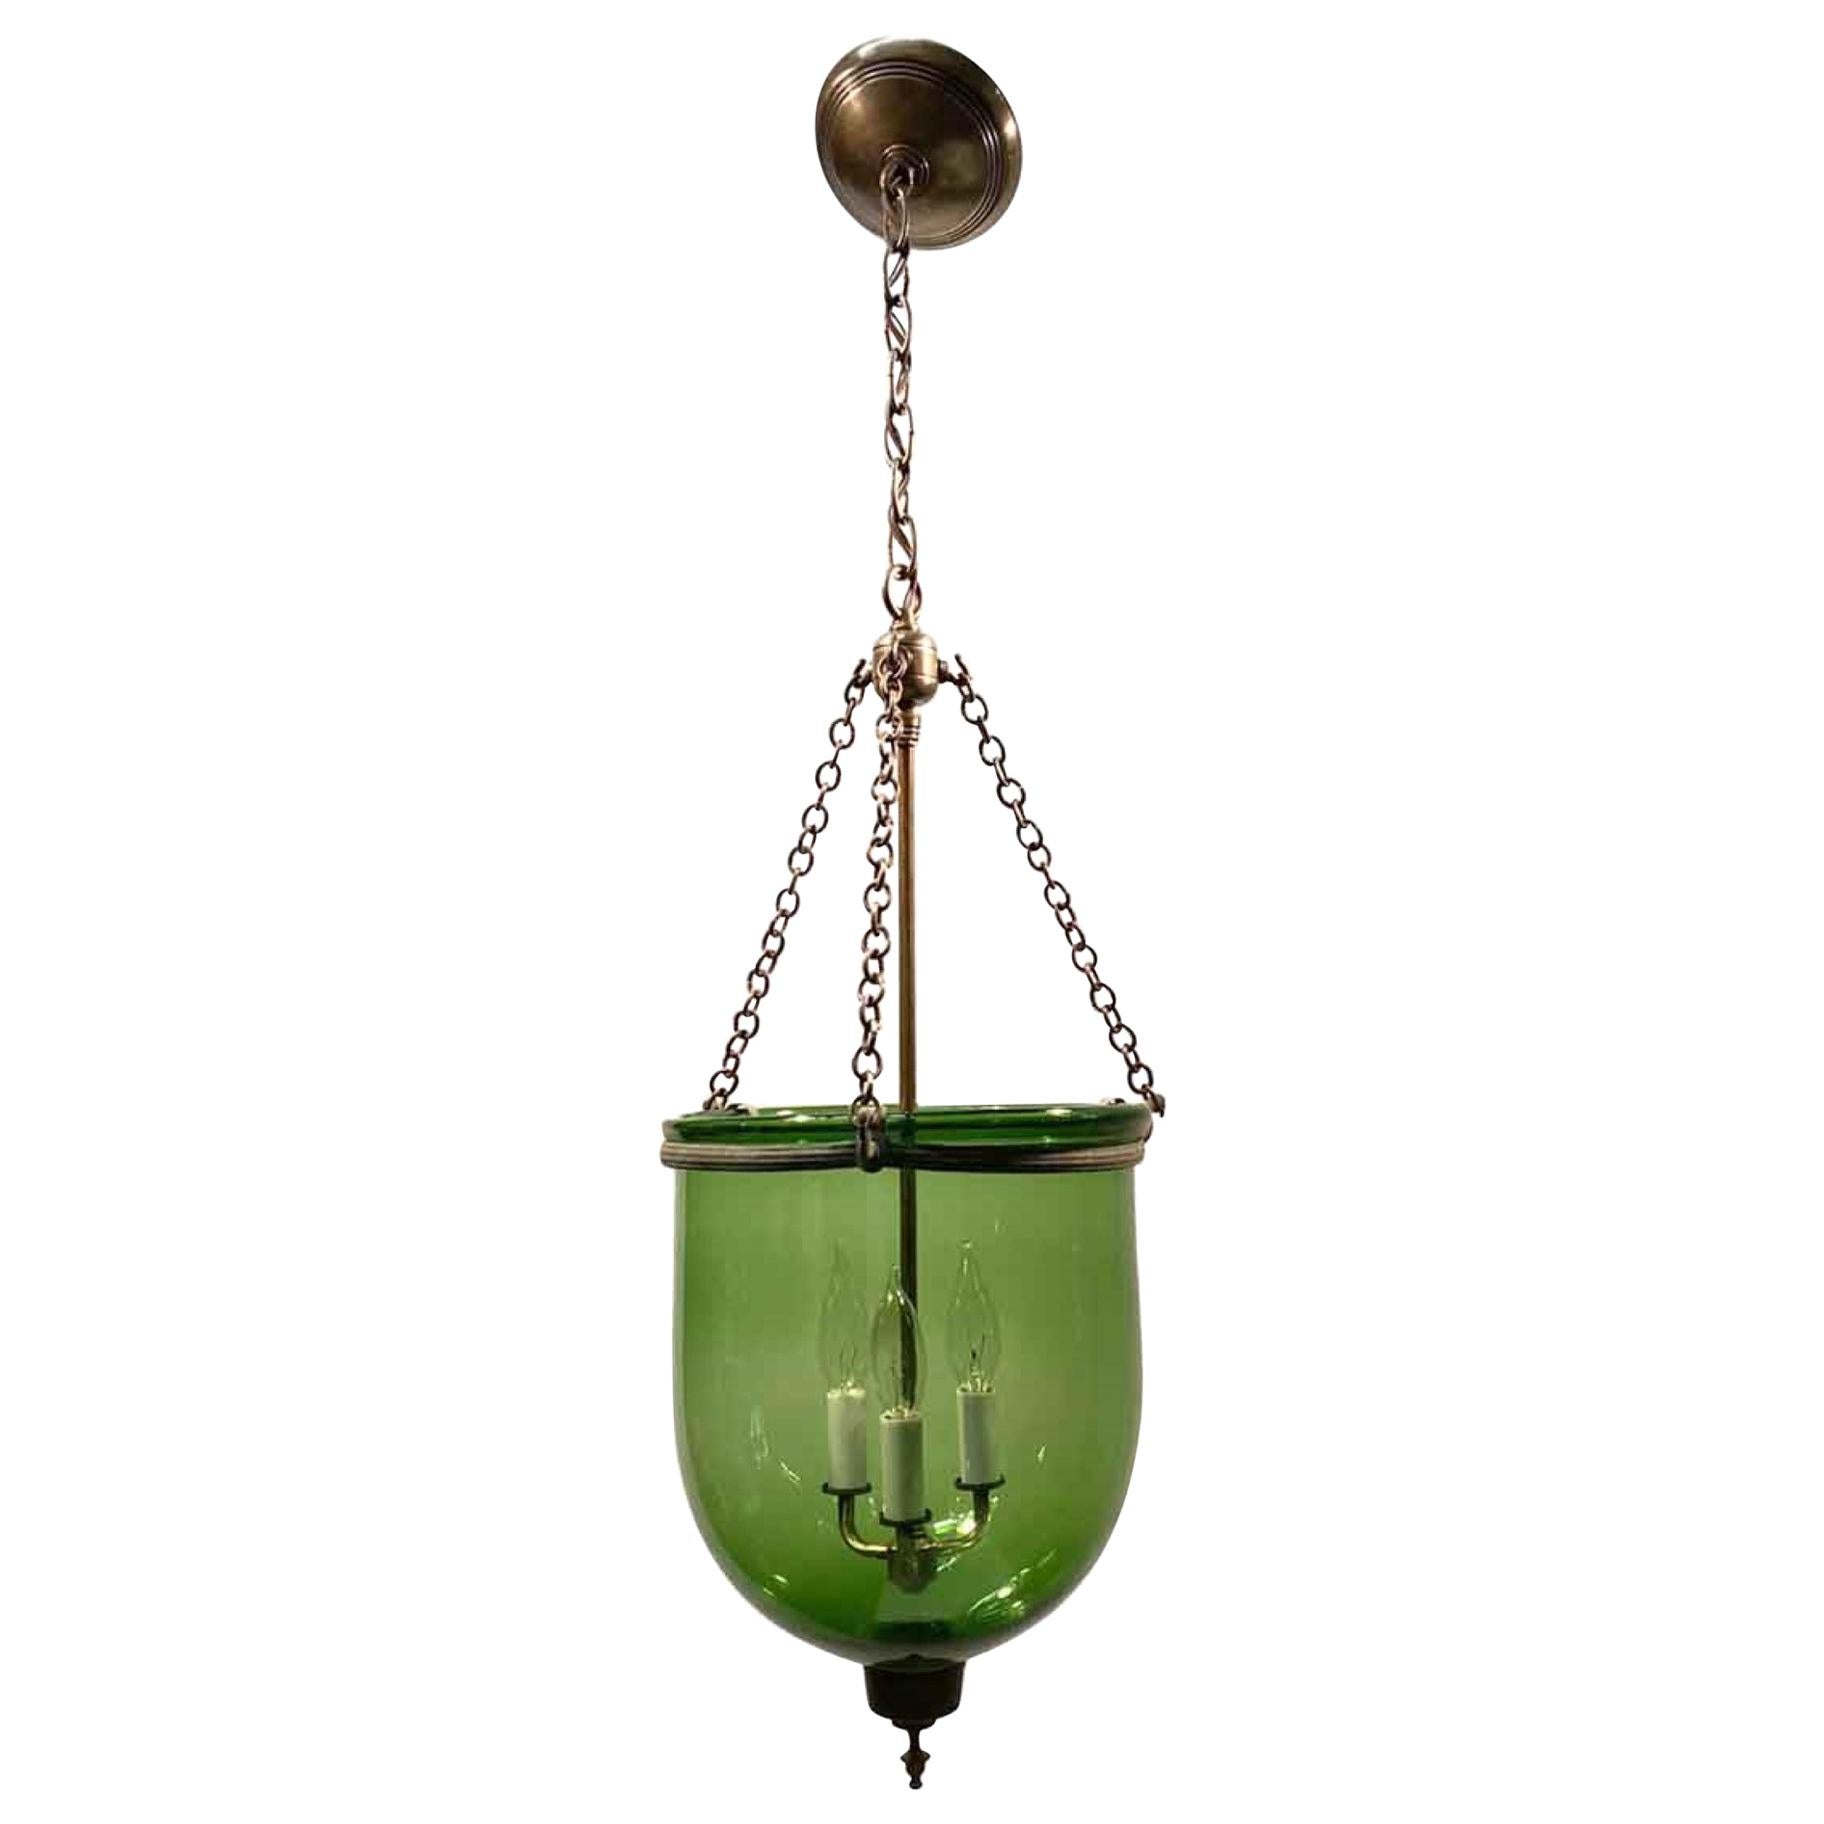 19th Century Hand Blown Green Glass Bell Jar Pendant Light with New Hardware